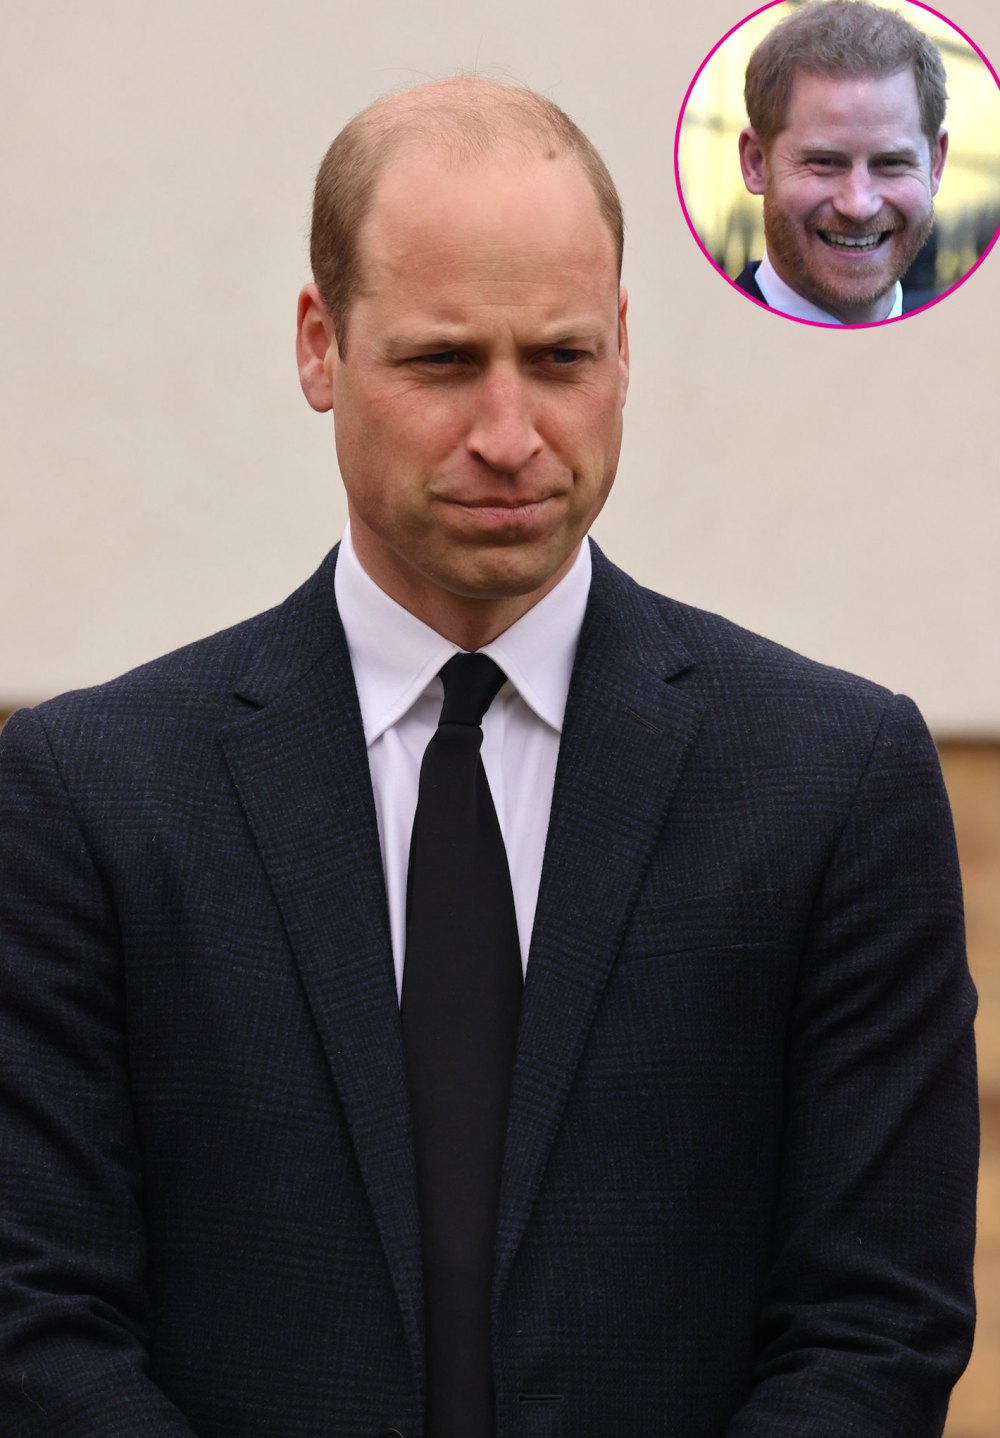 'Horrified' Prince William 'Doesn't Even Recognize' Prince Harry Anymore, Feels He's 'Lost' Brother for Good